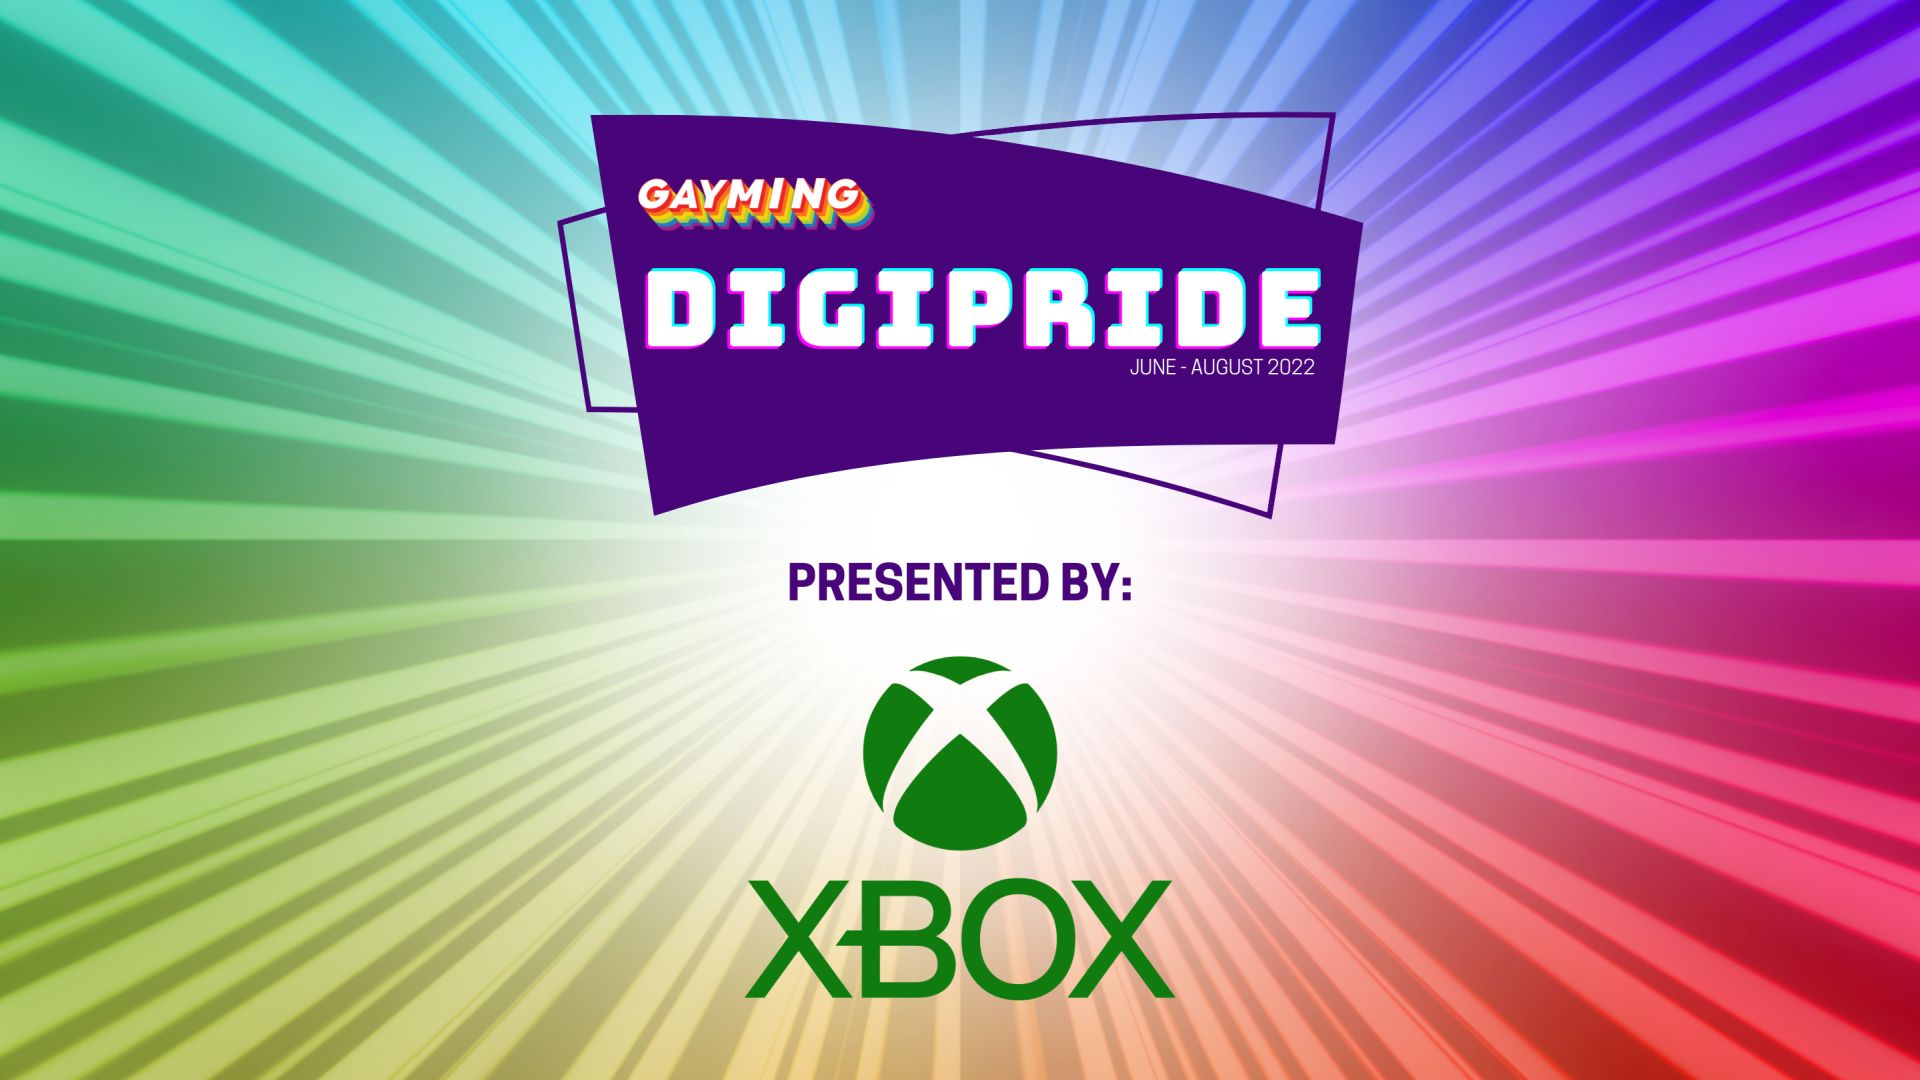 Play with Pride: Xbox Game Studios Publishing Announces Ongoing